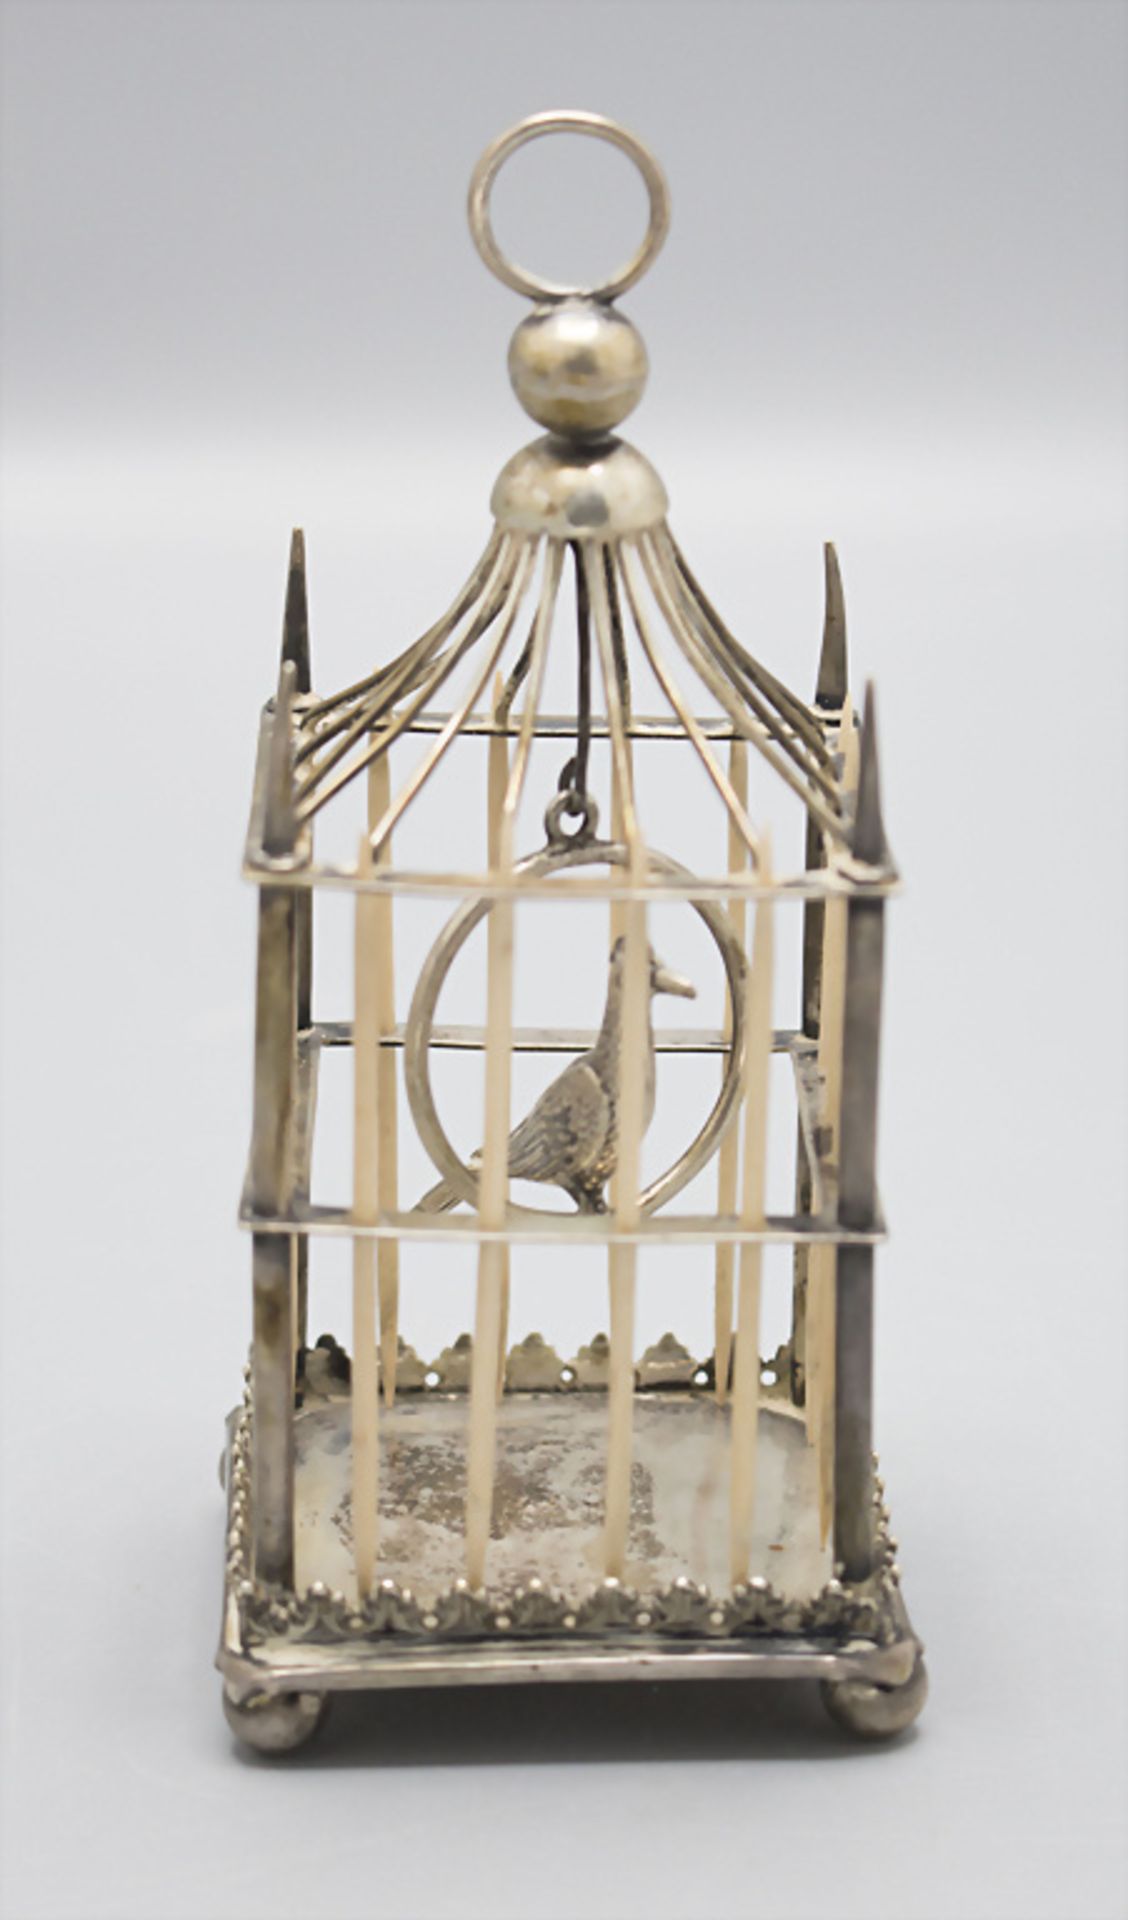 Vogelkäfig / A silver bird cage, Danzig, 19. Jh. - Image 2 of 4